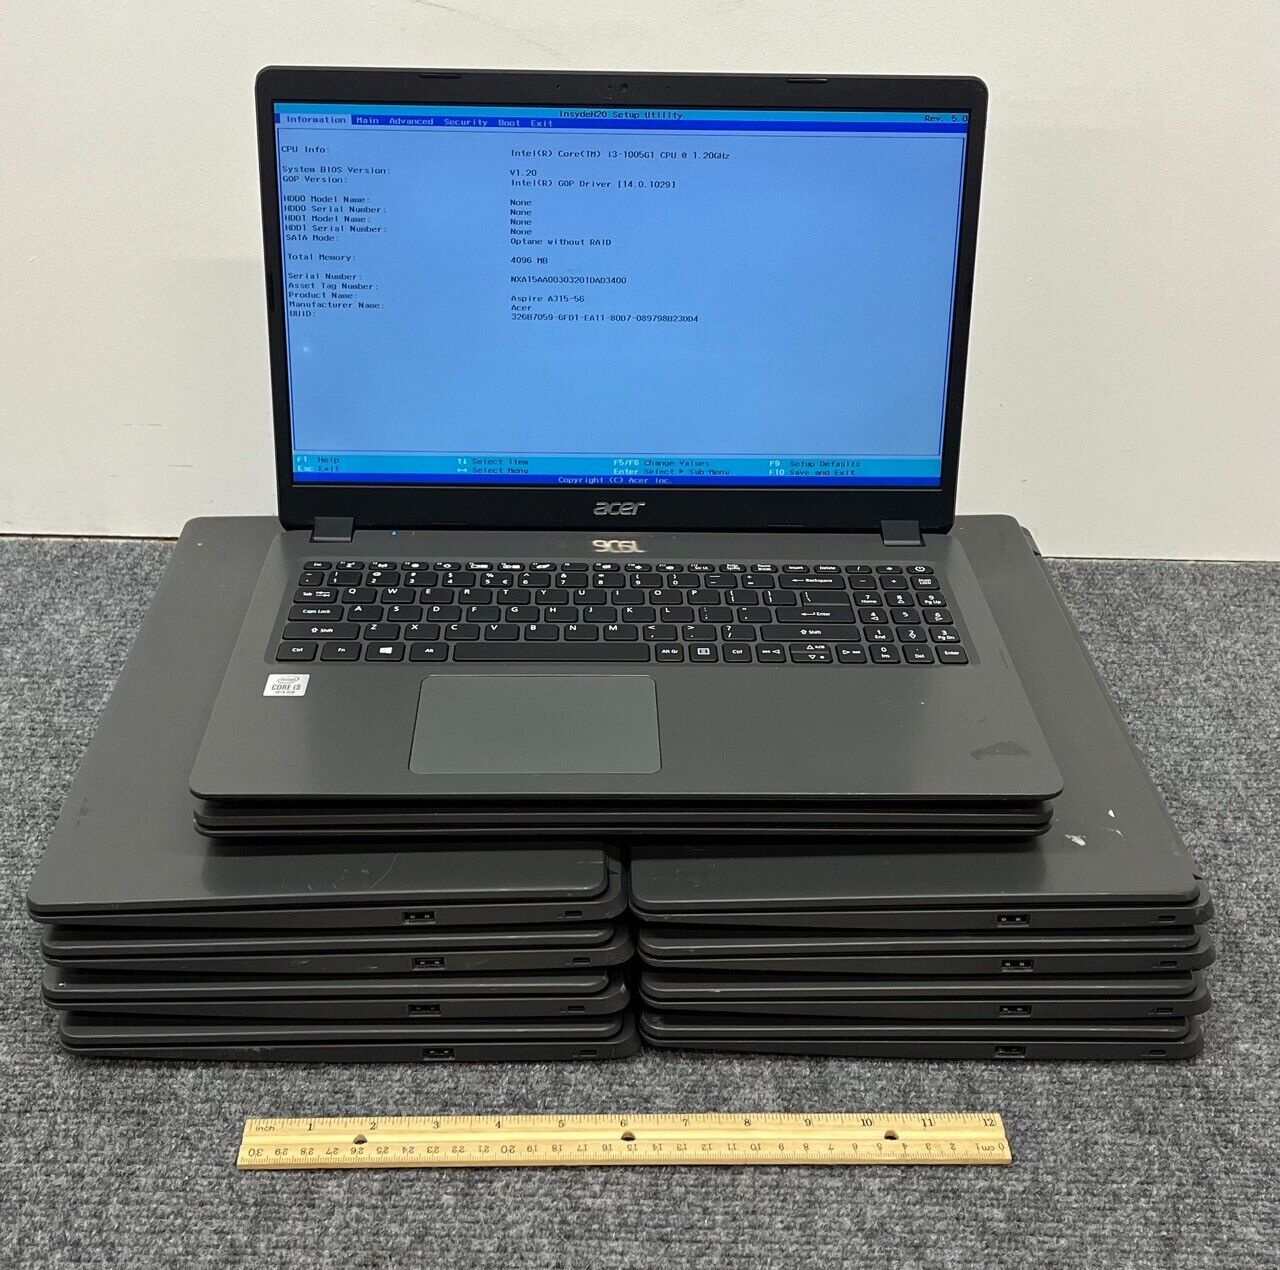 Lot of 10 Acer Aspire A315-56 Laptops i3-1005G1, 4GB, No Storage - Boots to BIOS